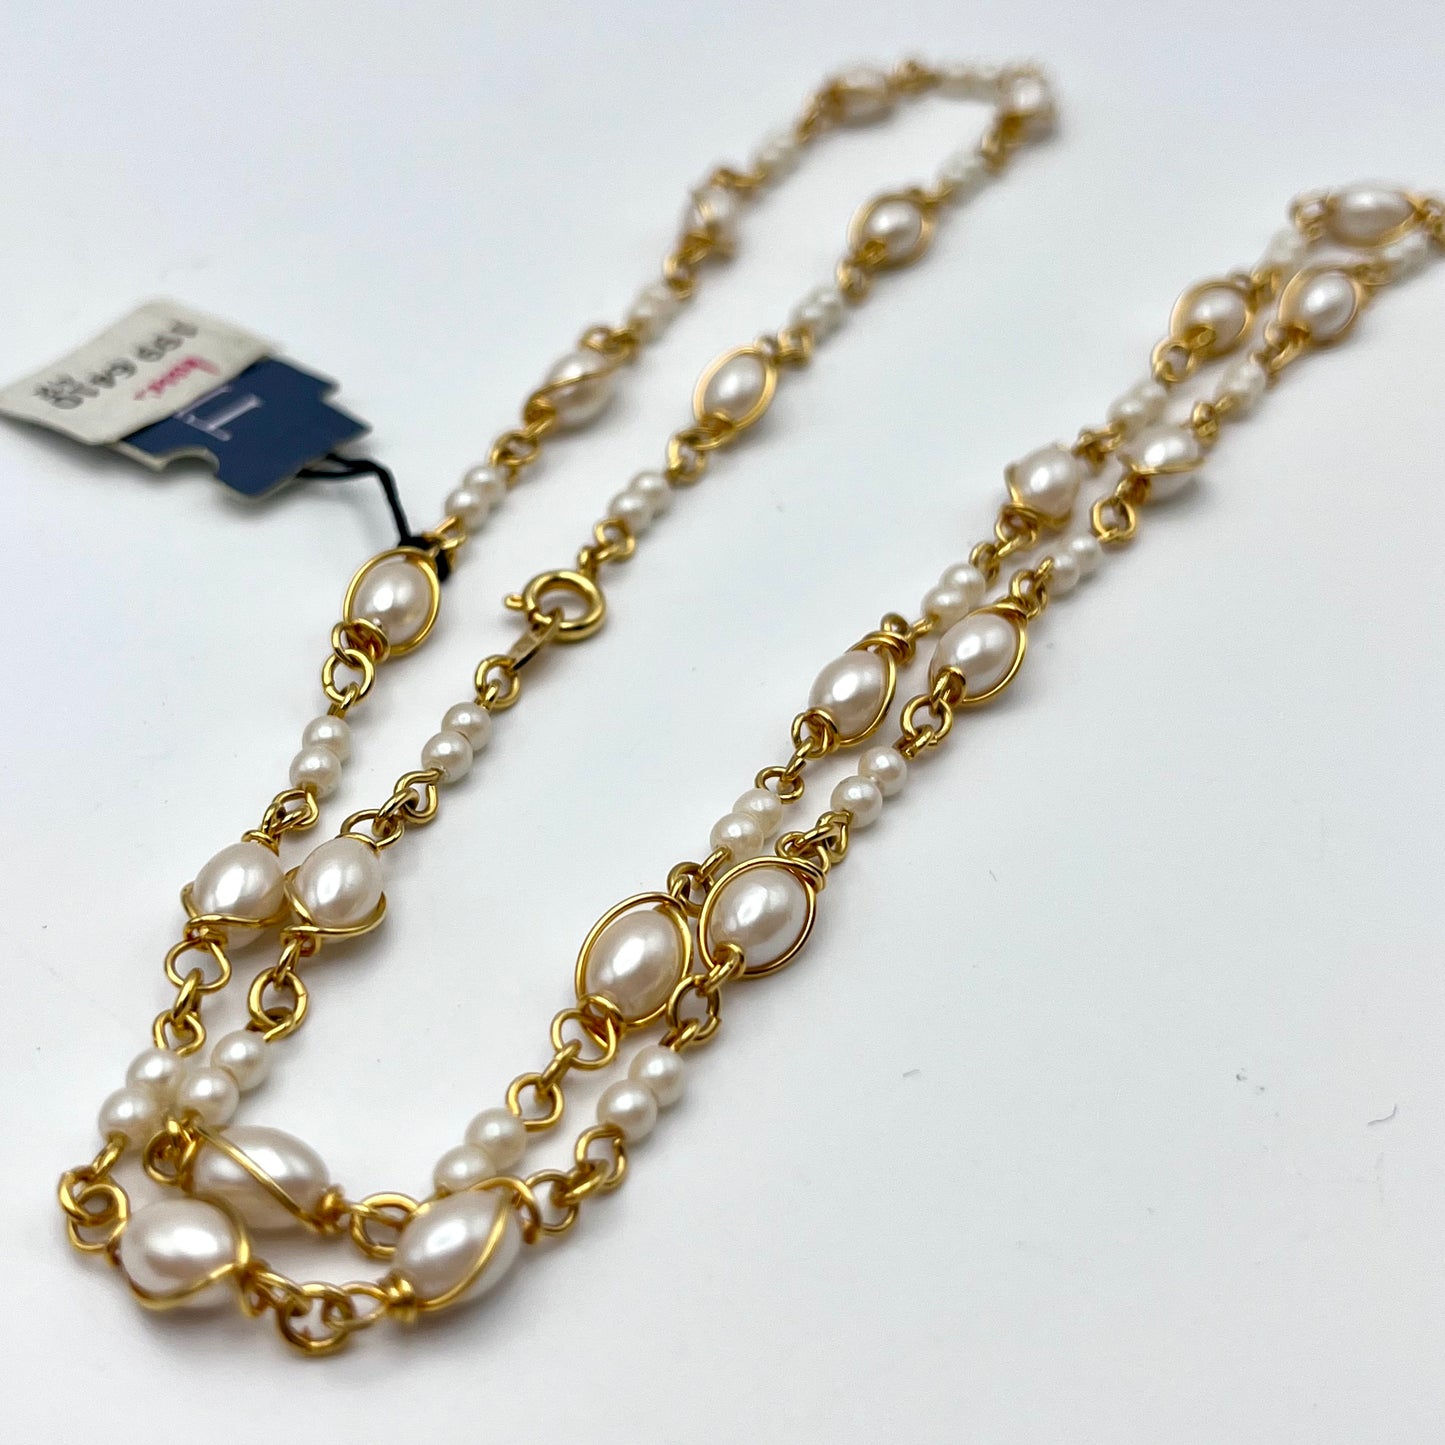 1980s Trifari Faux Pearl Necklace with Original Tag